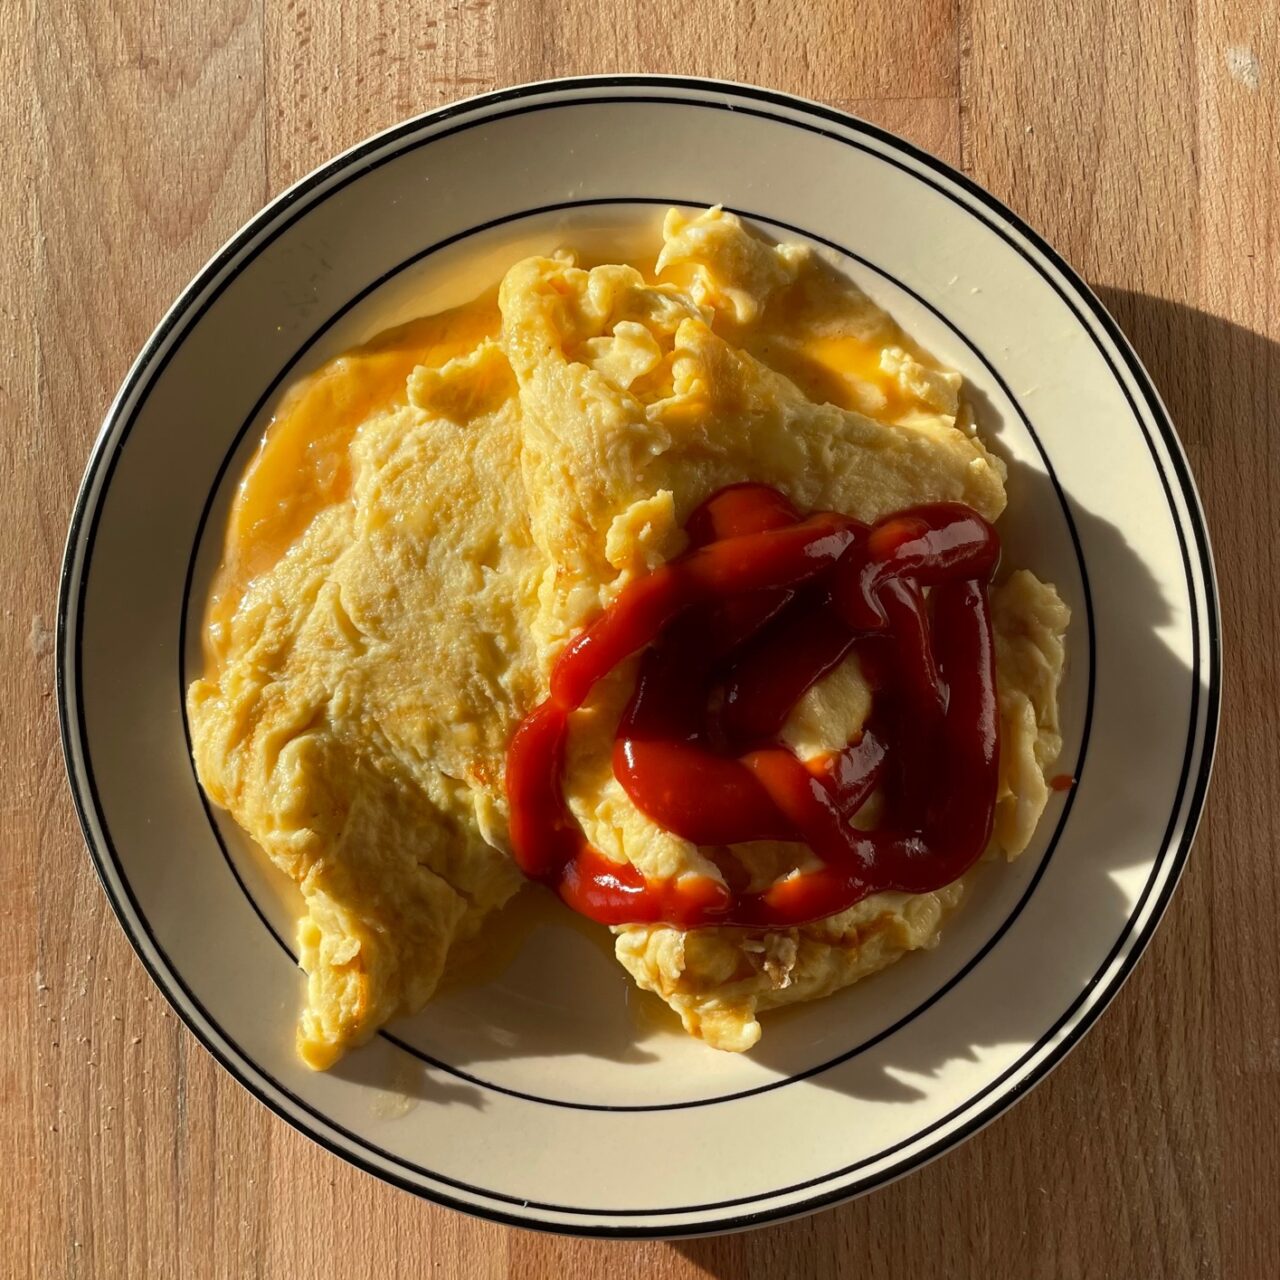 OSTOMELETT MED KETCHUP / CHEESE OMELETTE WITH KETCHUP